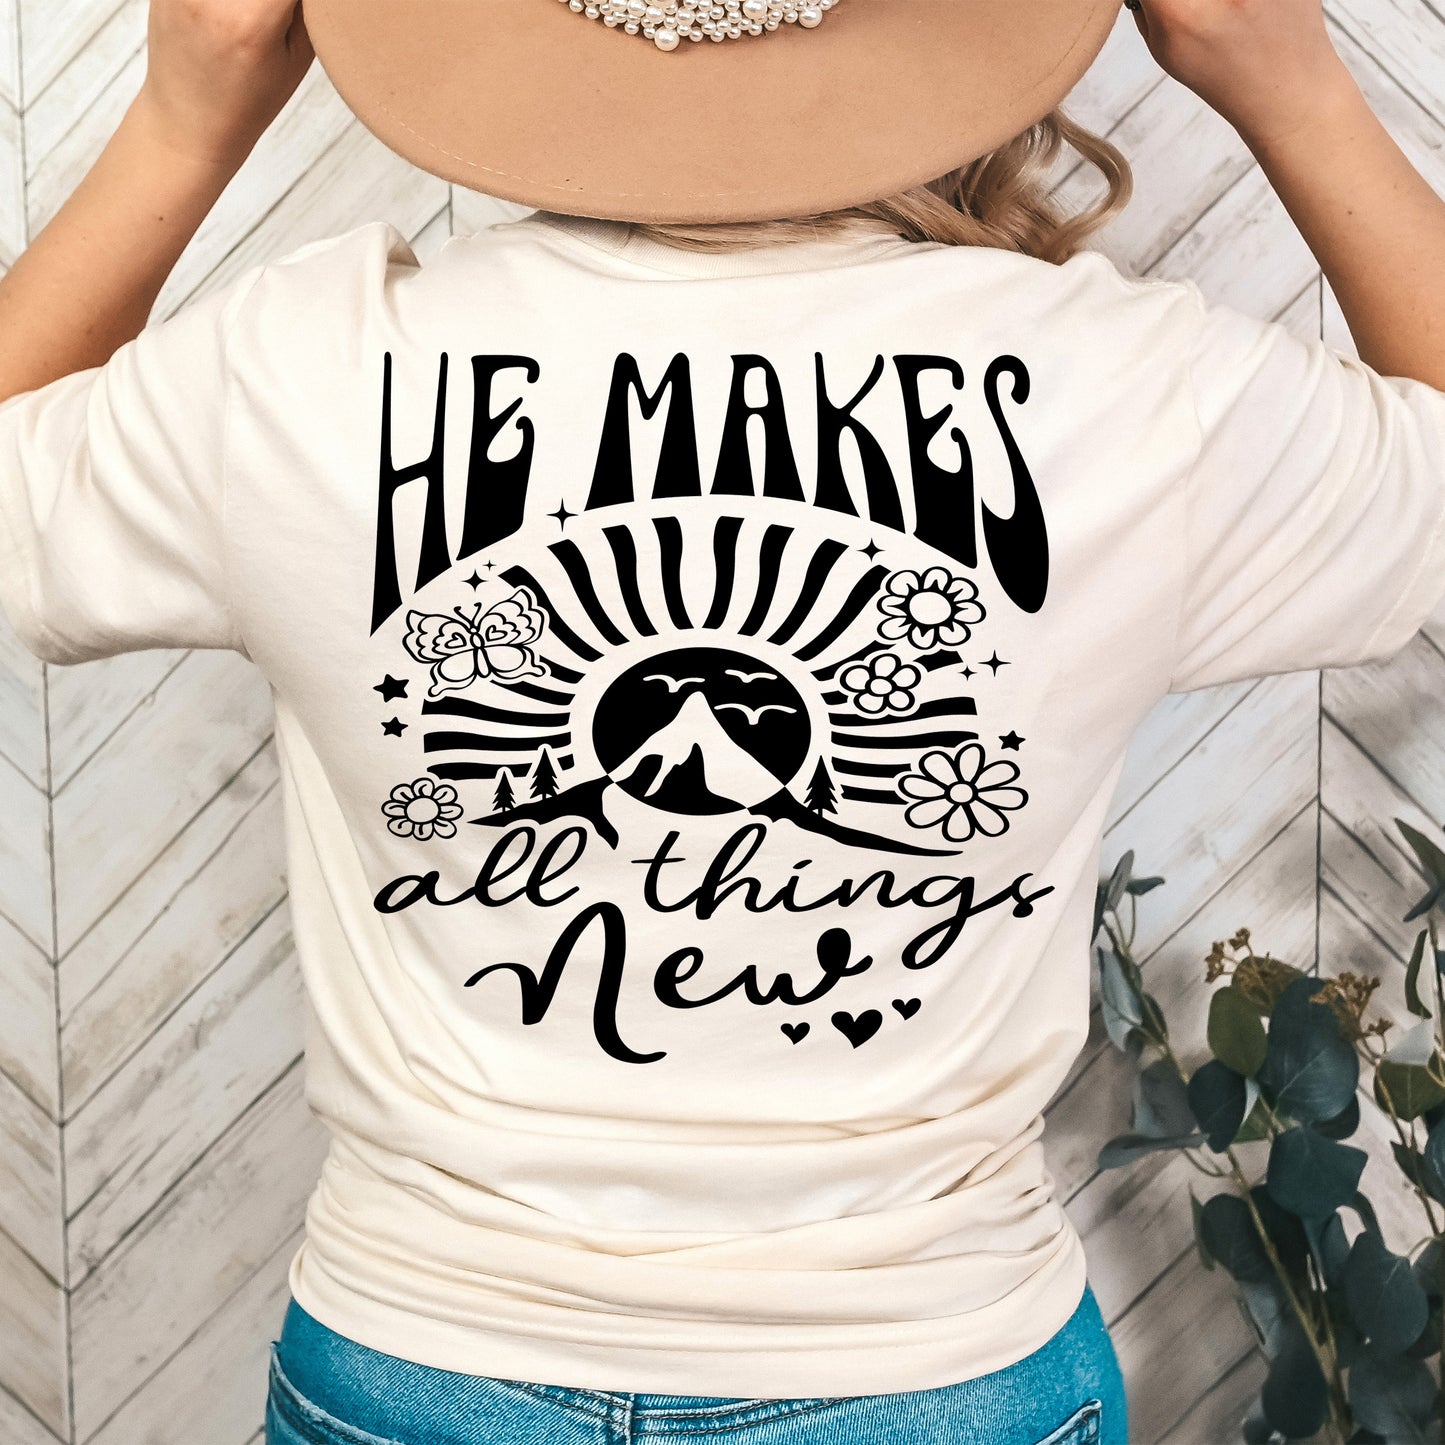 He Makes All Things New- Single Color (black)- 11.5" wide Plastisol Screen Print Transfer